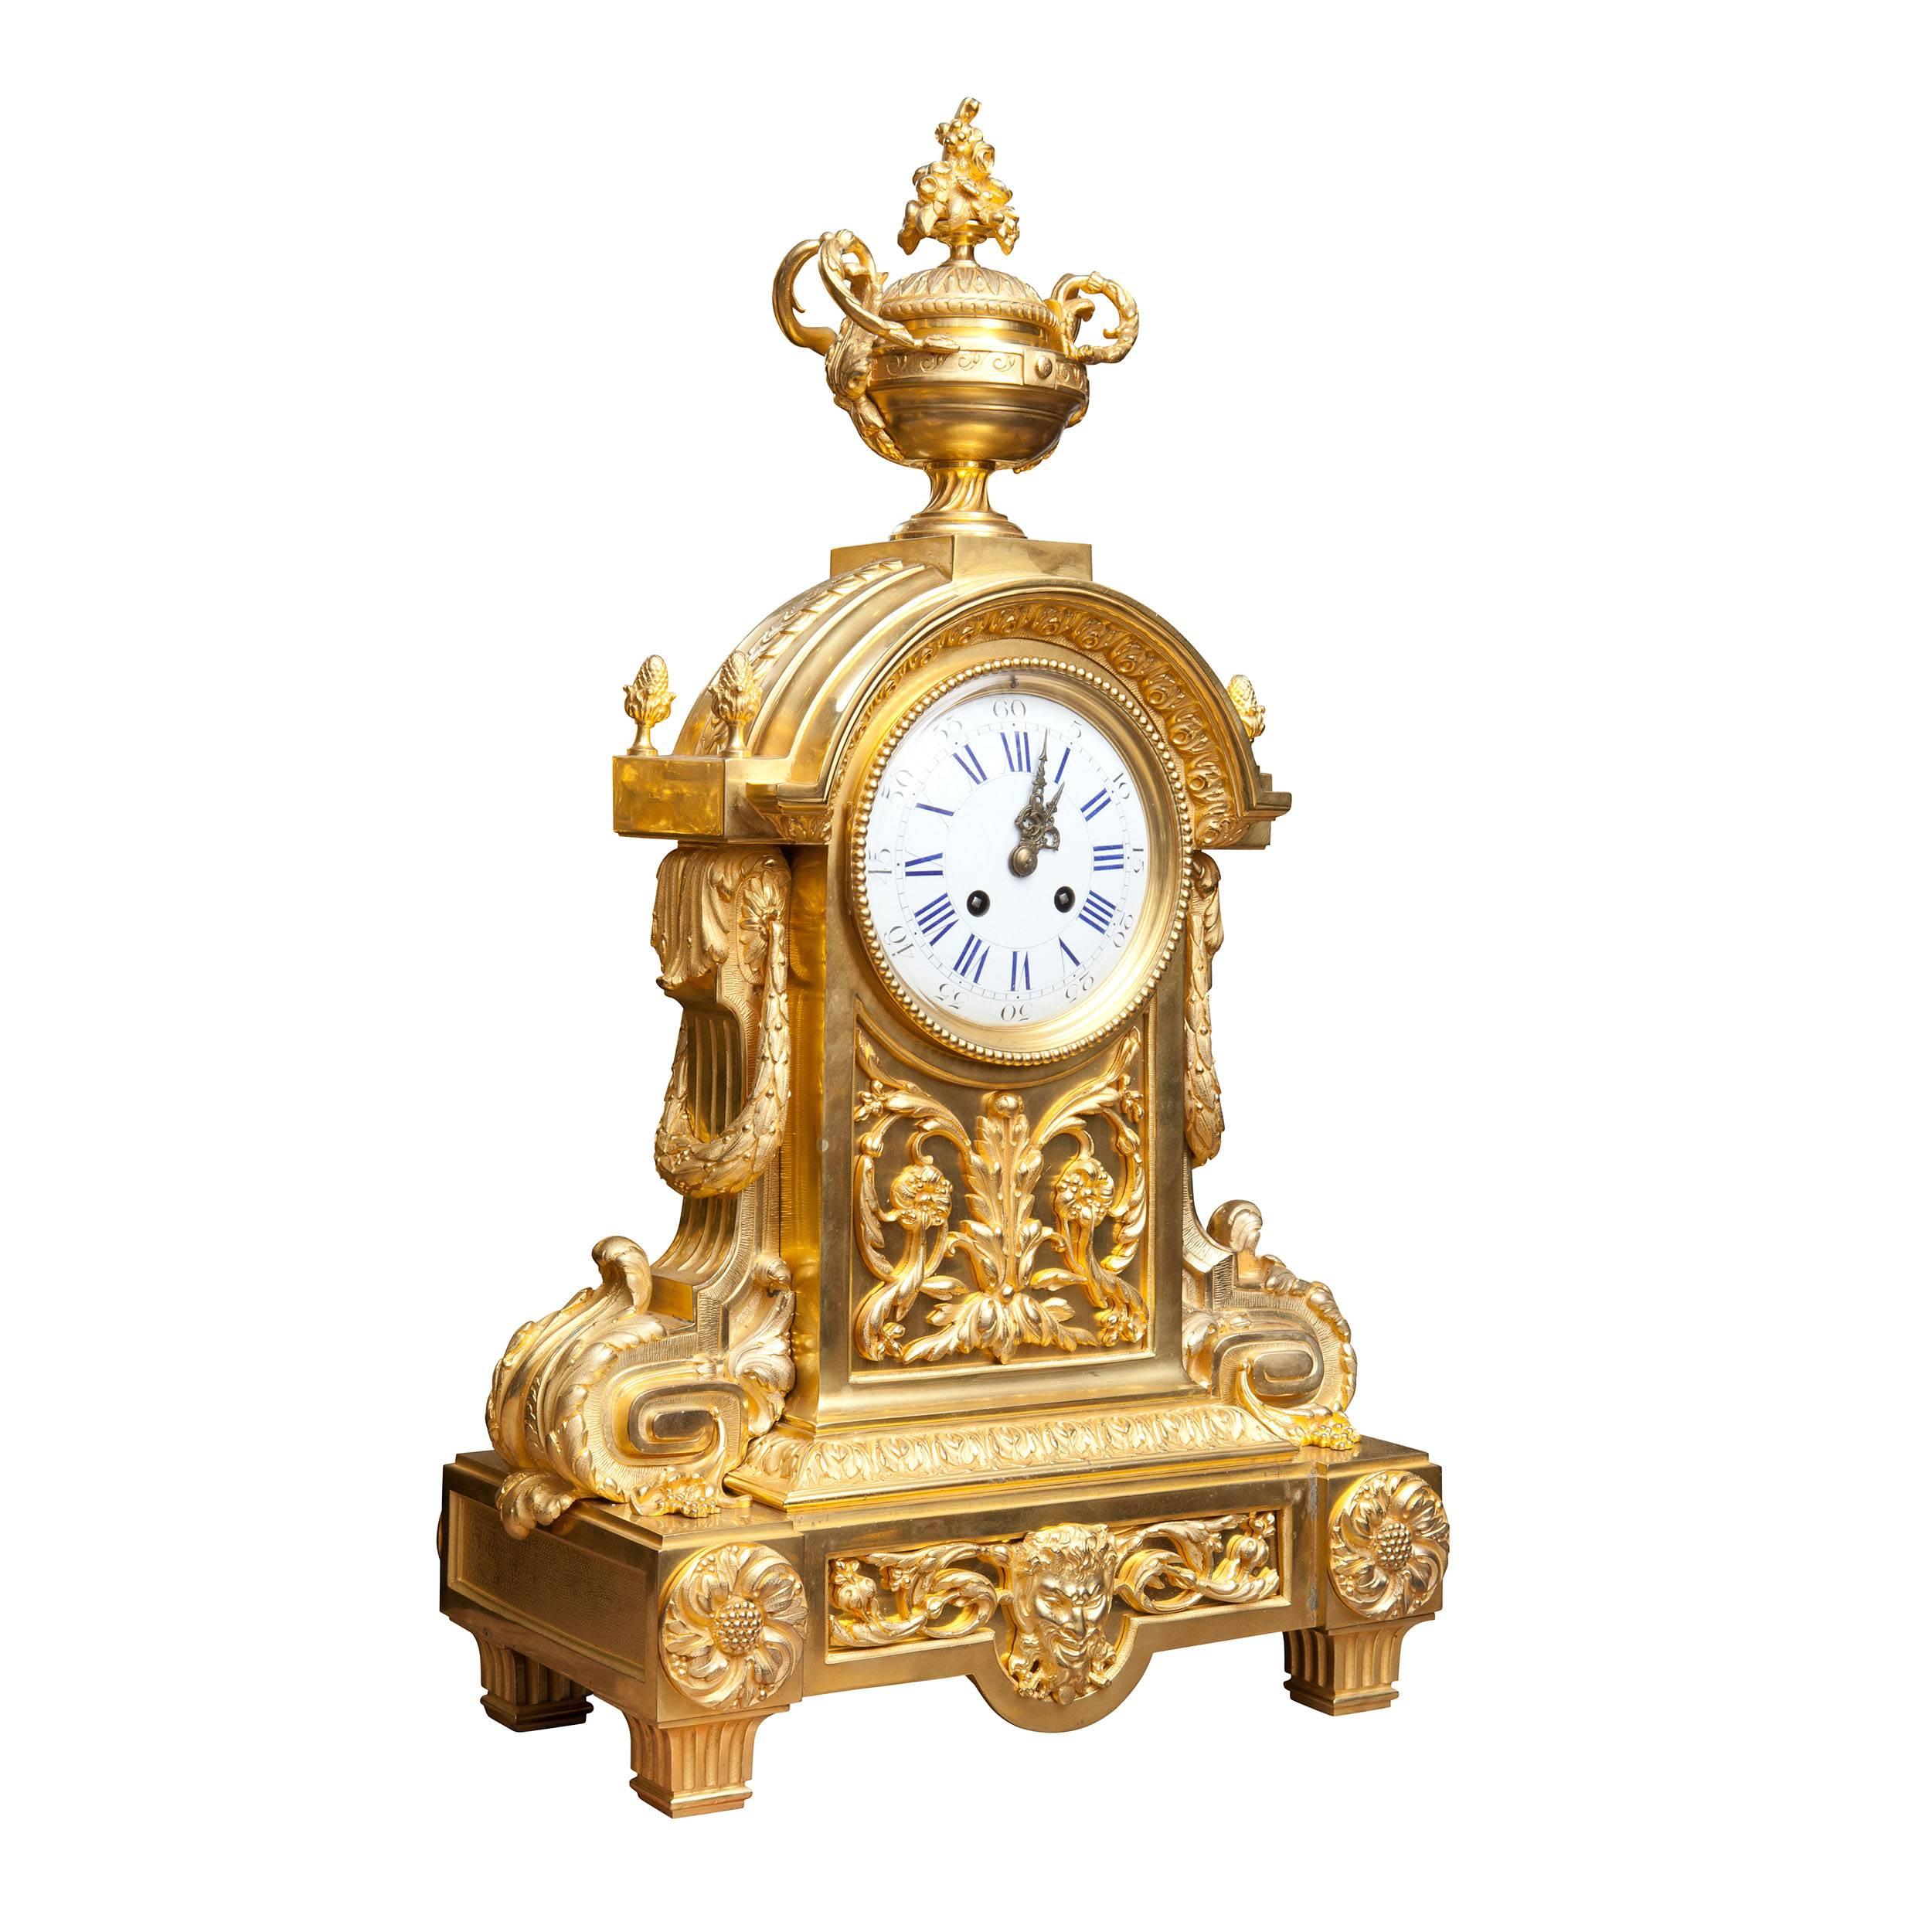 France, circa 1880.
A fine French, gilt bronze ormolu mantel clock with its porcelain face, the case with elaborate garland decorations culminating in a volute krater of flowers above.

​Striking every half hour and hour.
Measures:
Height